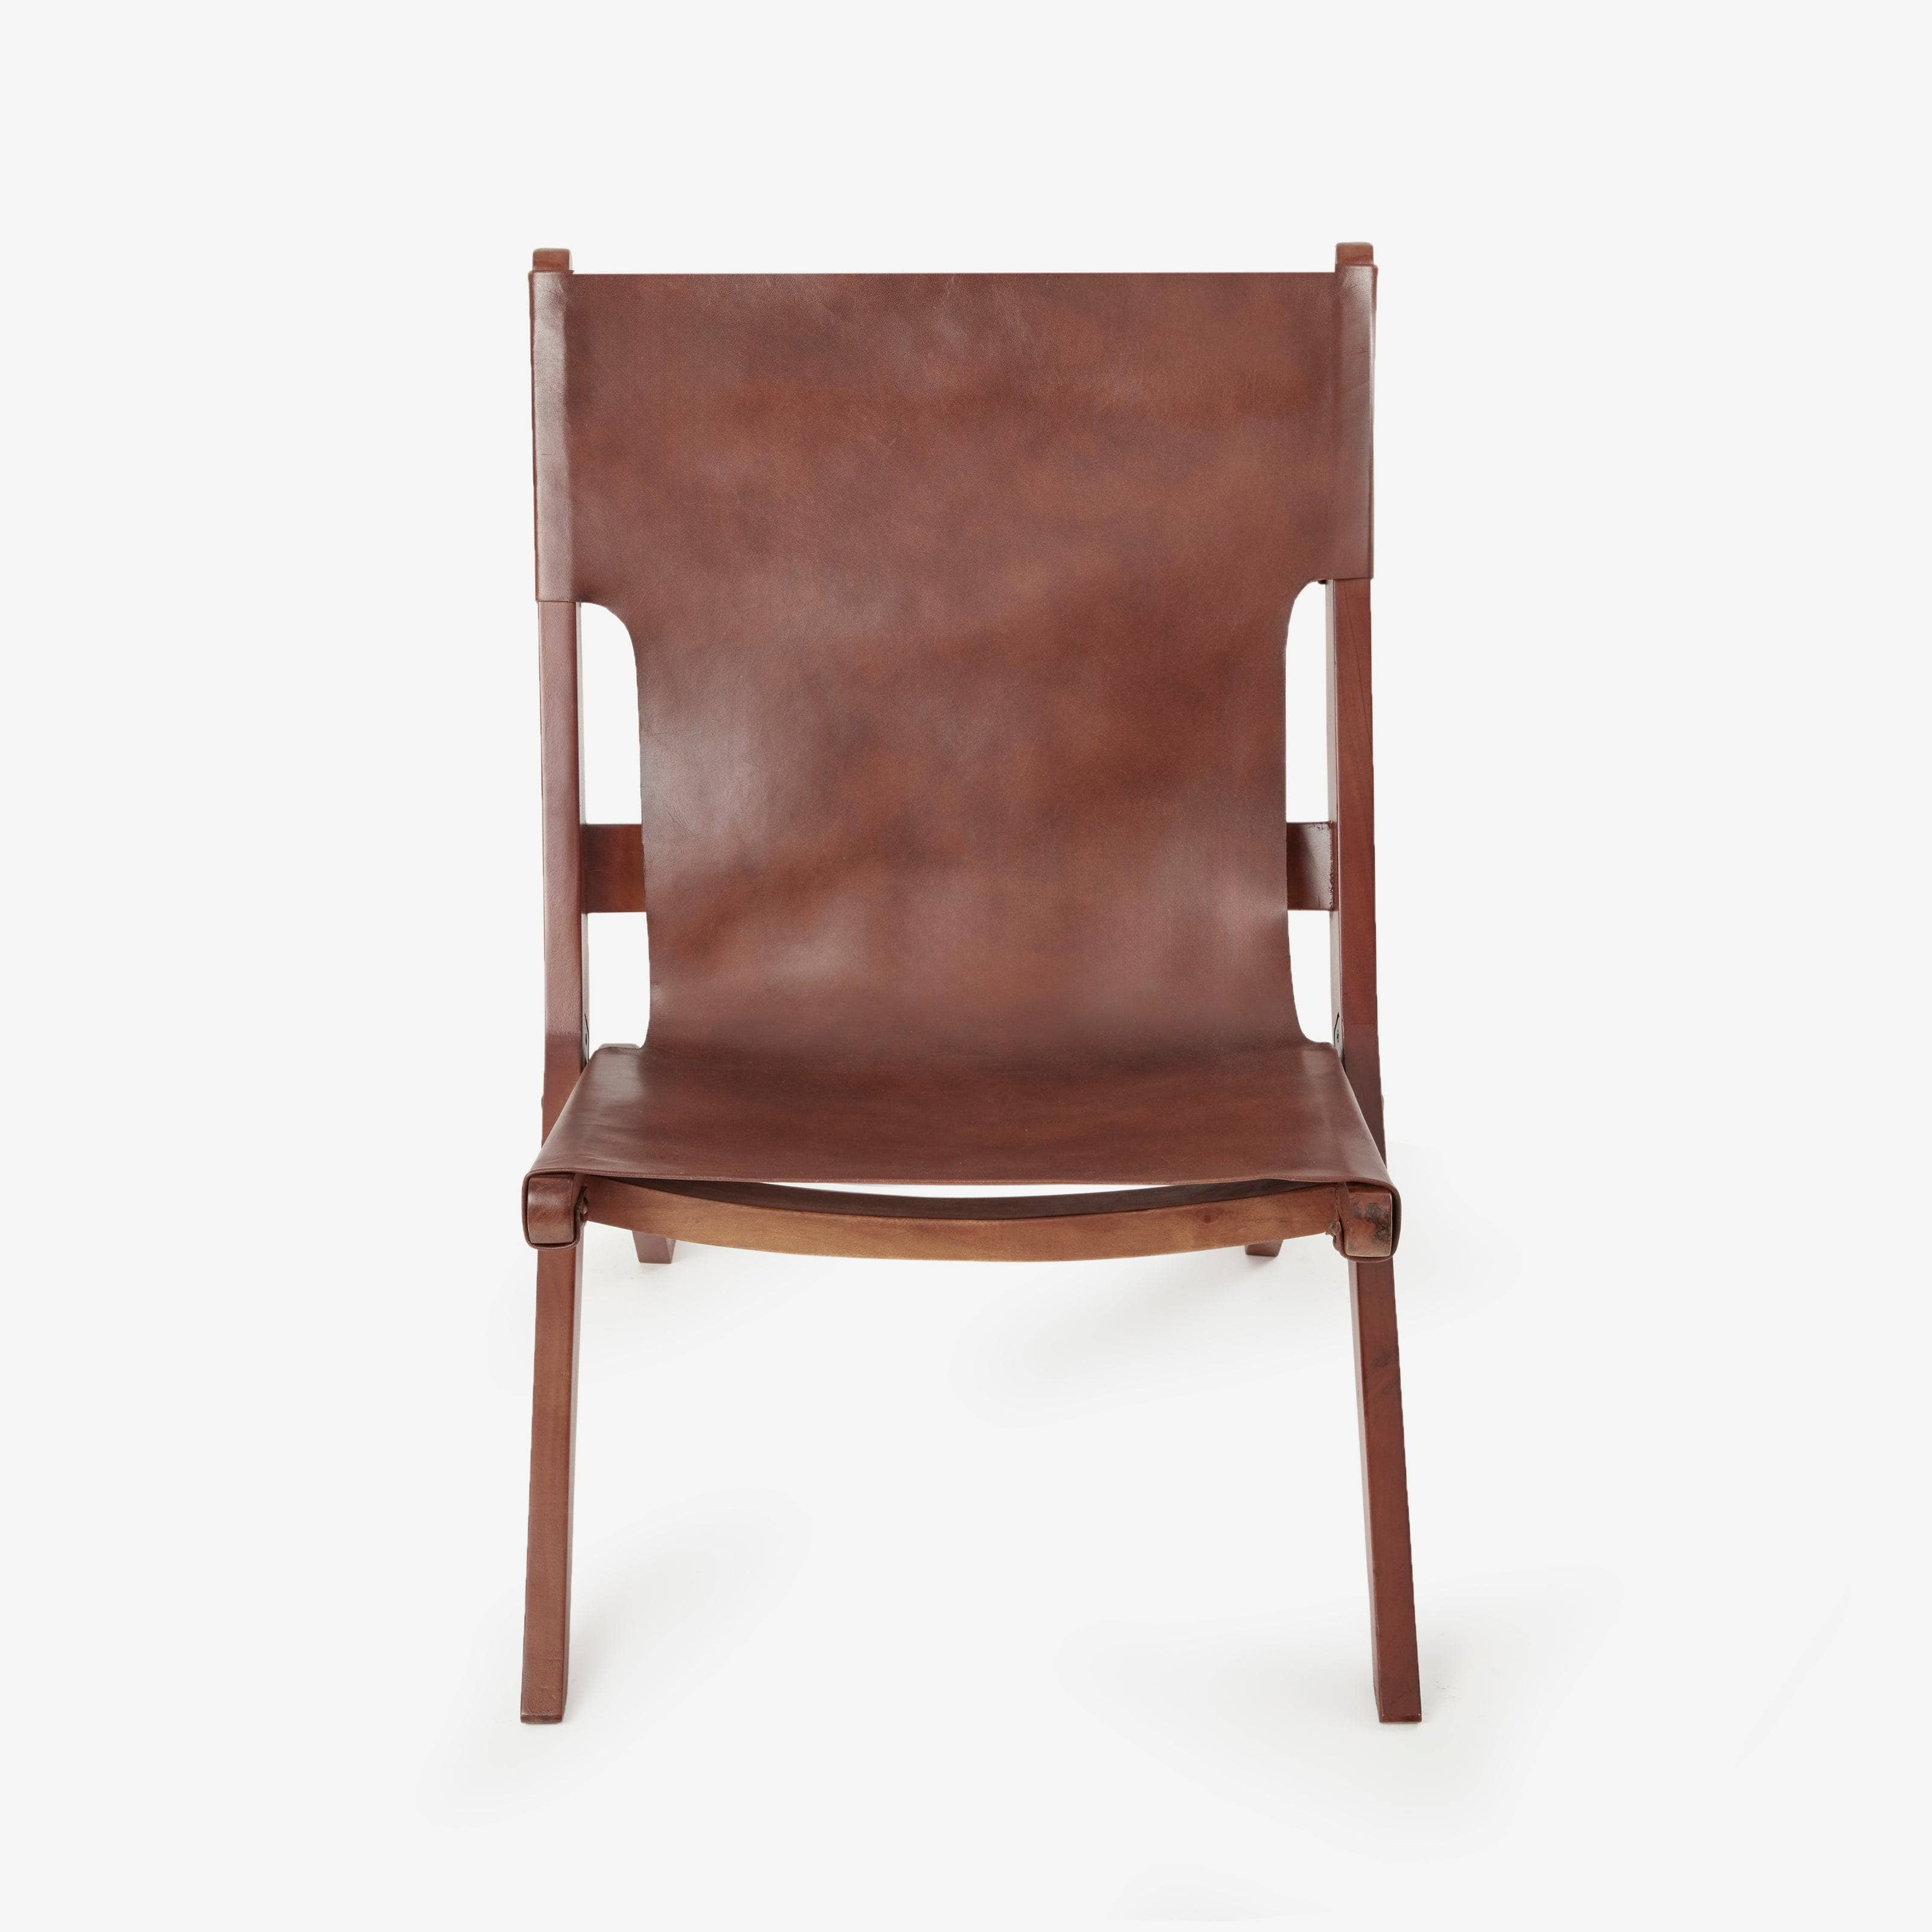 Arusha Leather Accent Chair, Tan